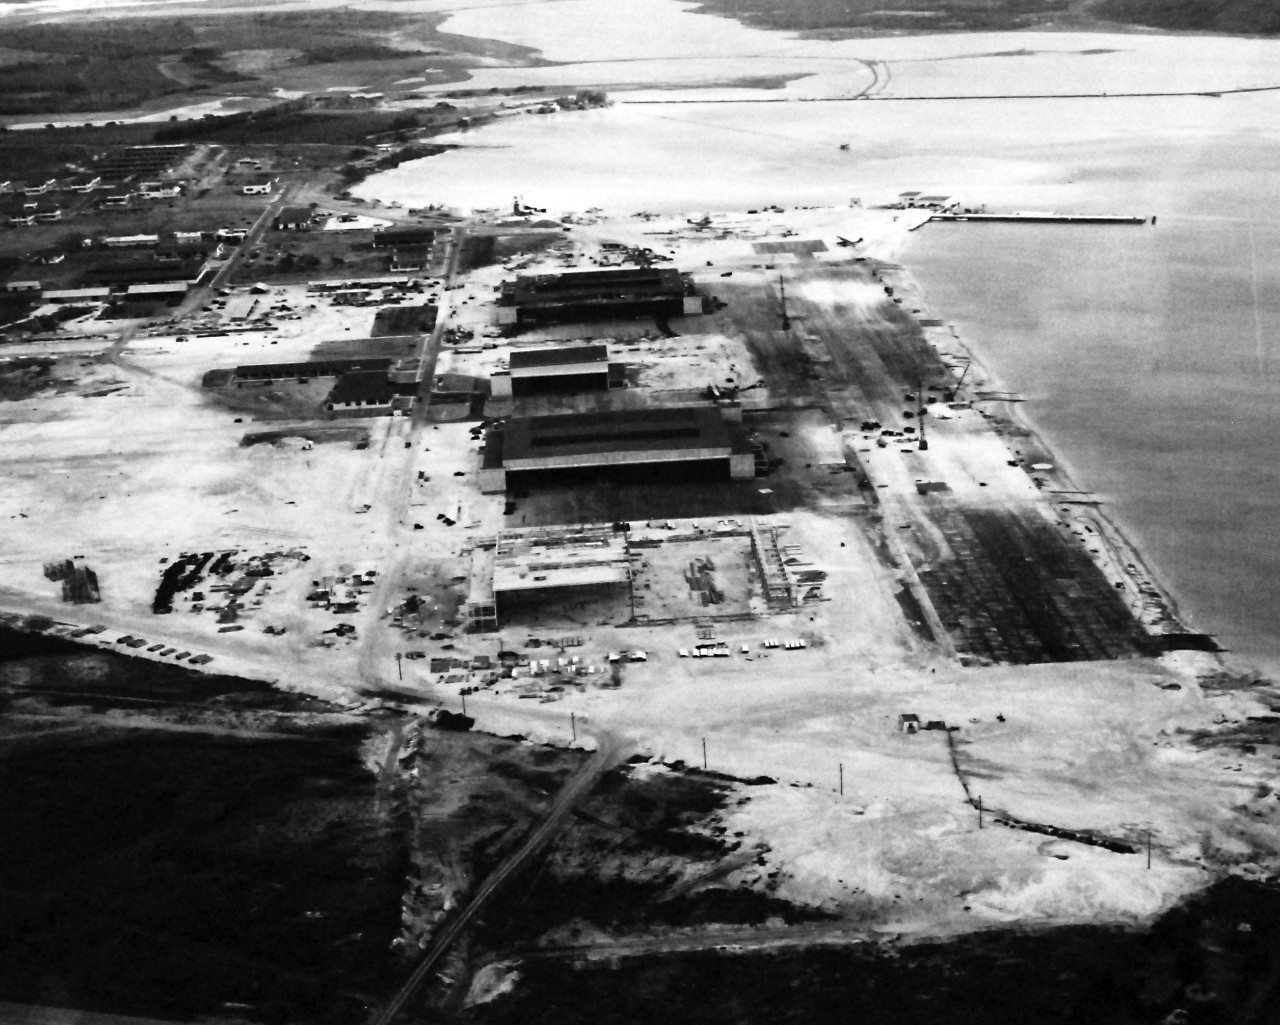 80-G-32942:   Japanese Attack on Pearl Harbor Attack, 7 December 1941.    Hangar area at Naval Air Station, Kaneohe Bay, Territory of Hawaii, showing wrought by Japanese bombing  View shows the area looking southeast. U.S. Navy photograph, now in the collections of the National Archives.     (9/13/2013).